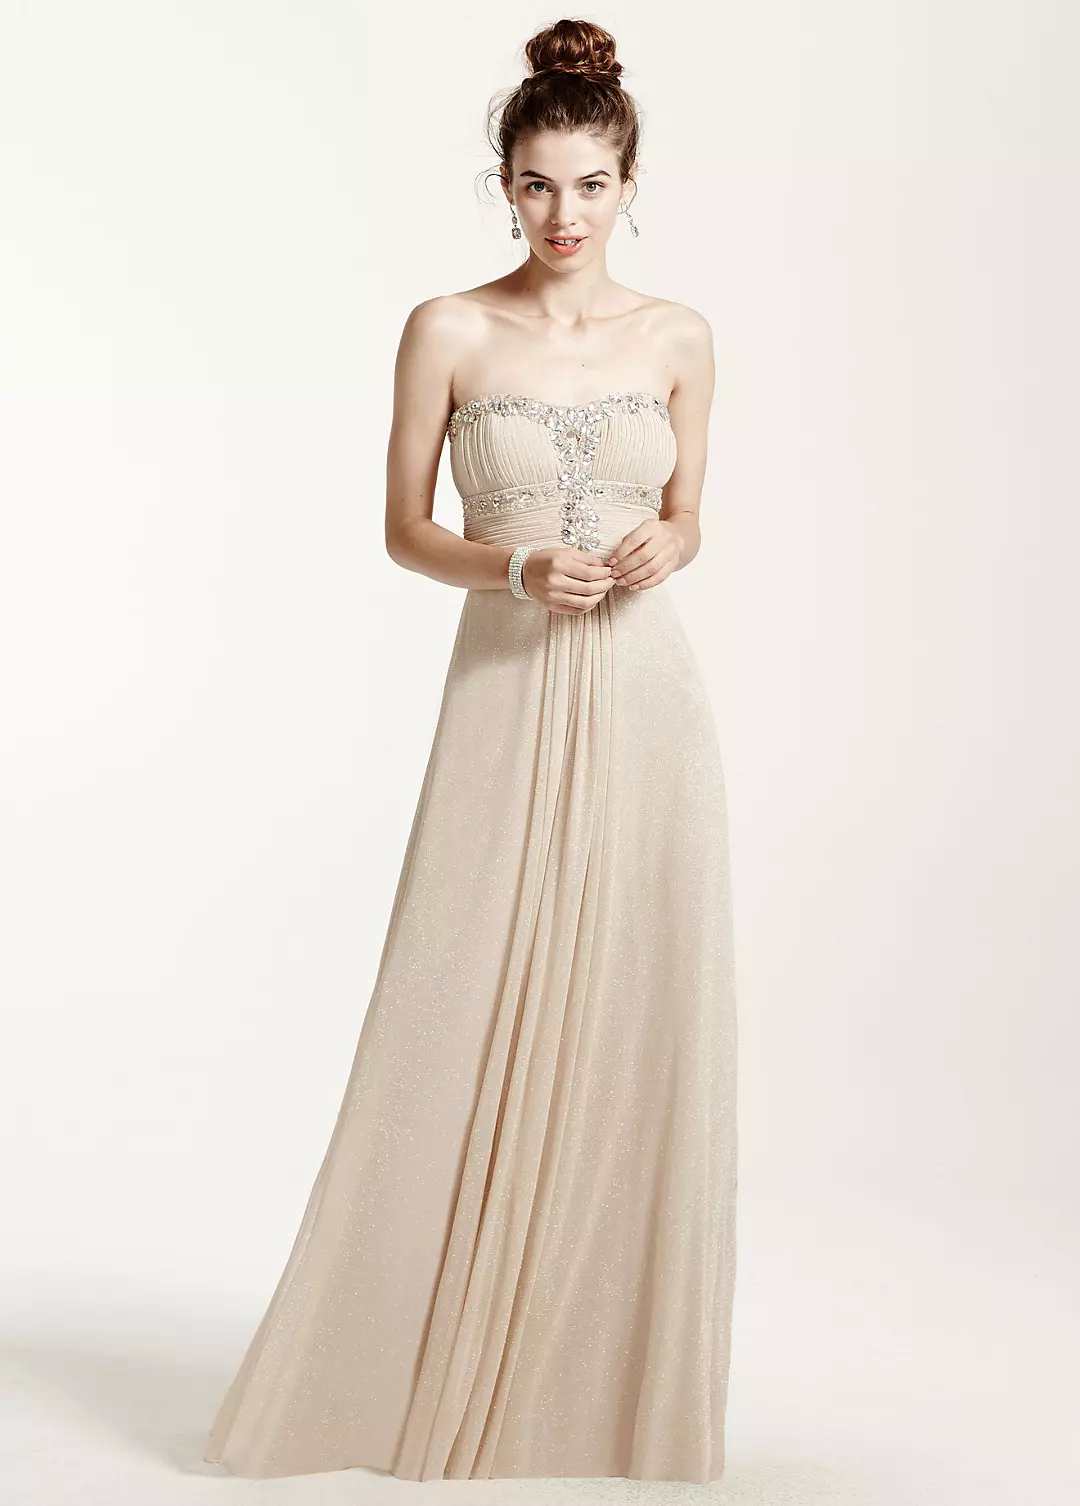 Strapless Glitter Jersey Dress with Shirred Bodice Image